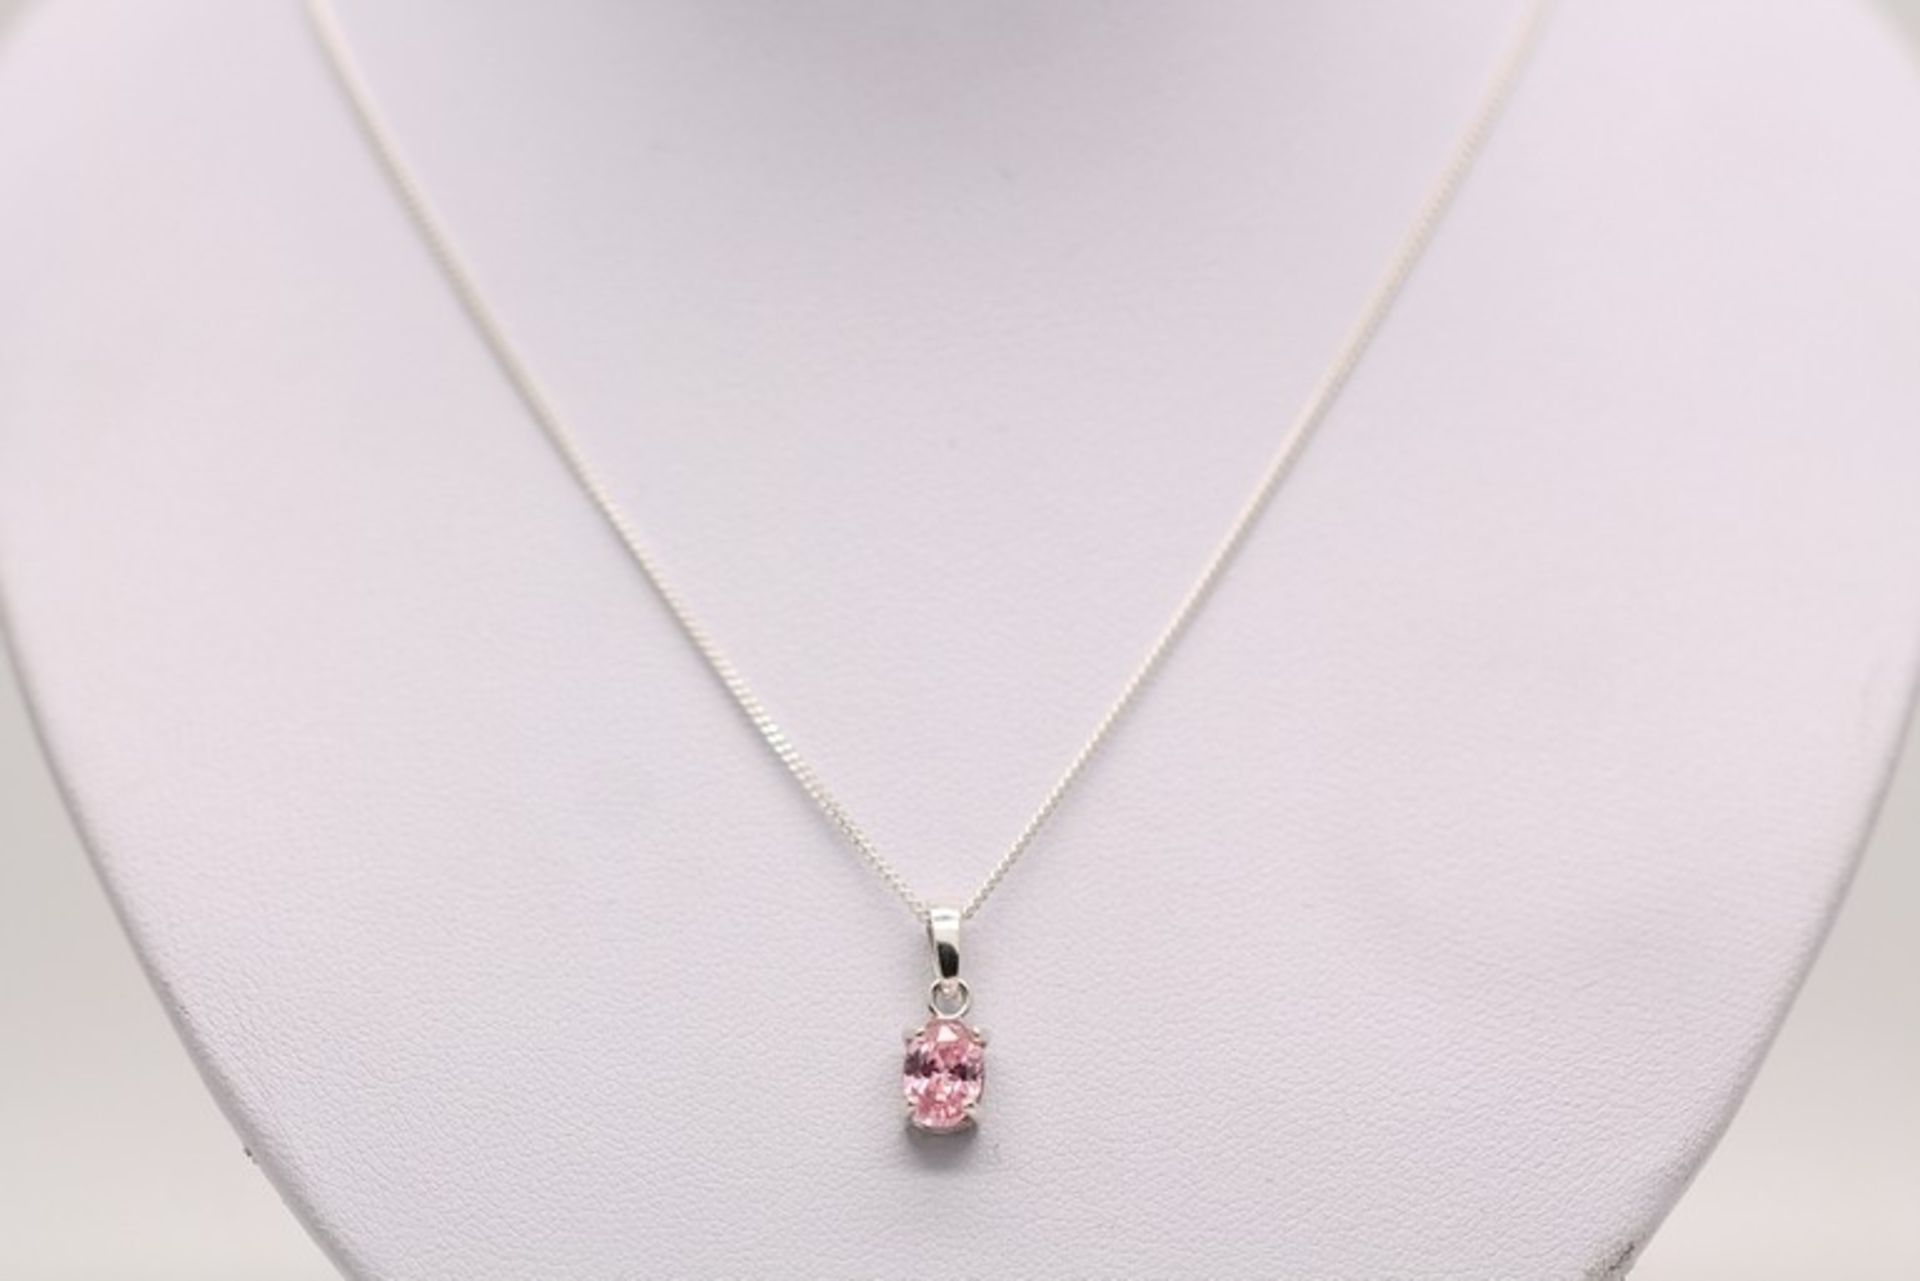 1 x BOXED BRAND NEW SOLID SILVER LADIES NECKLACE SET WITH A PINK AAA+ SIMULATED DIAMONDS (PV-JH)(64)